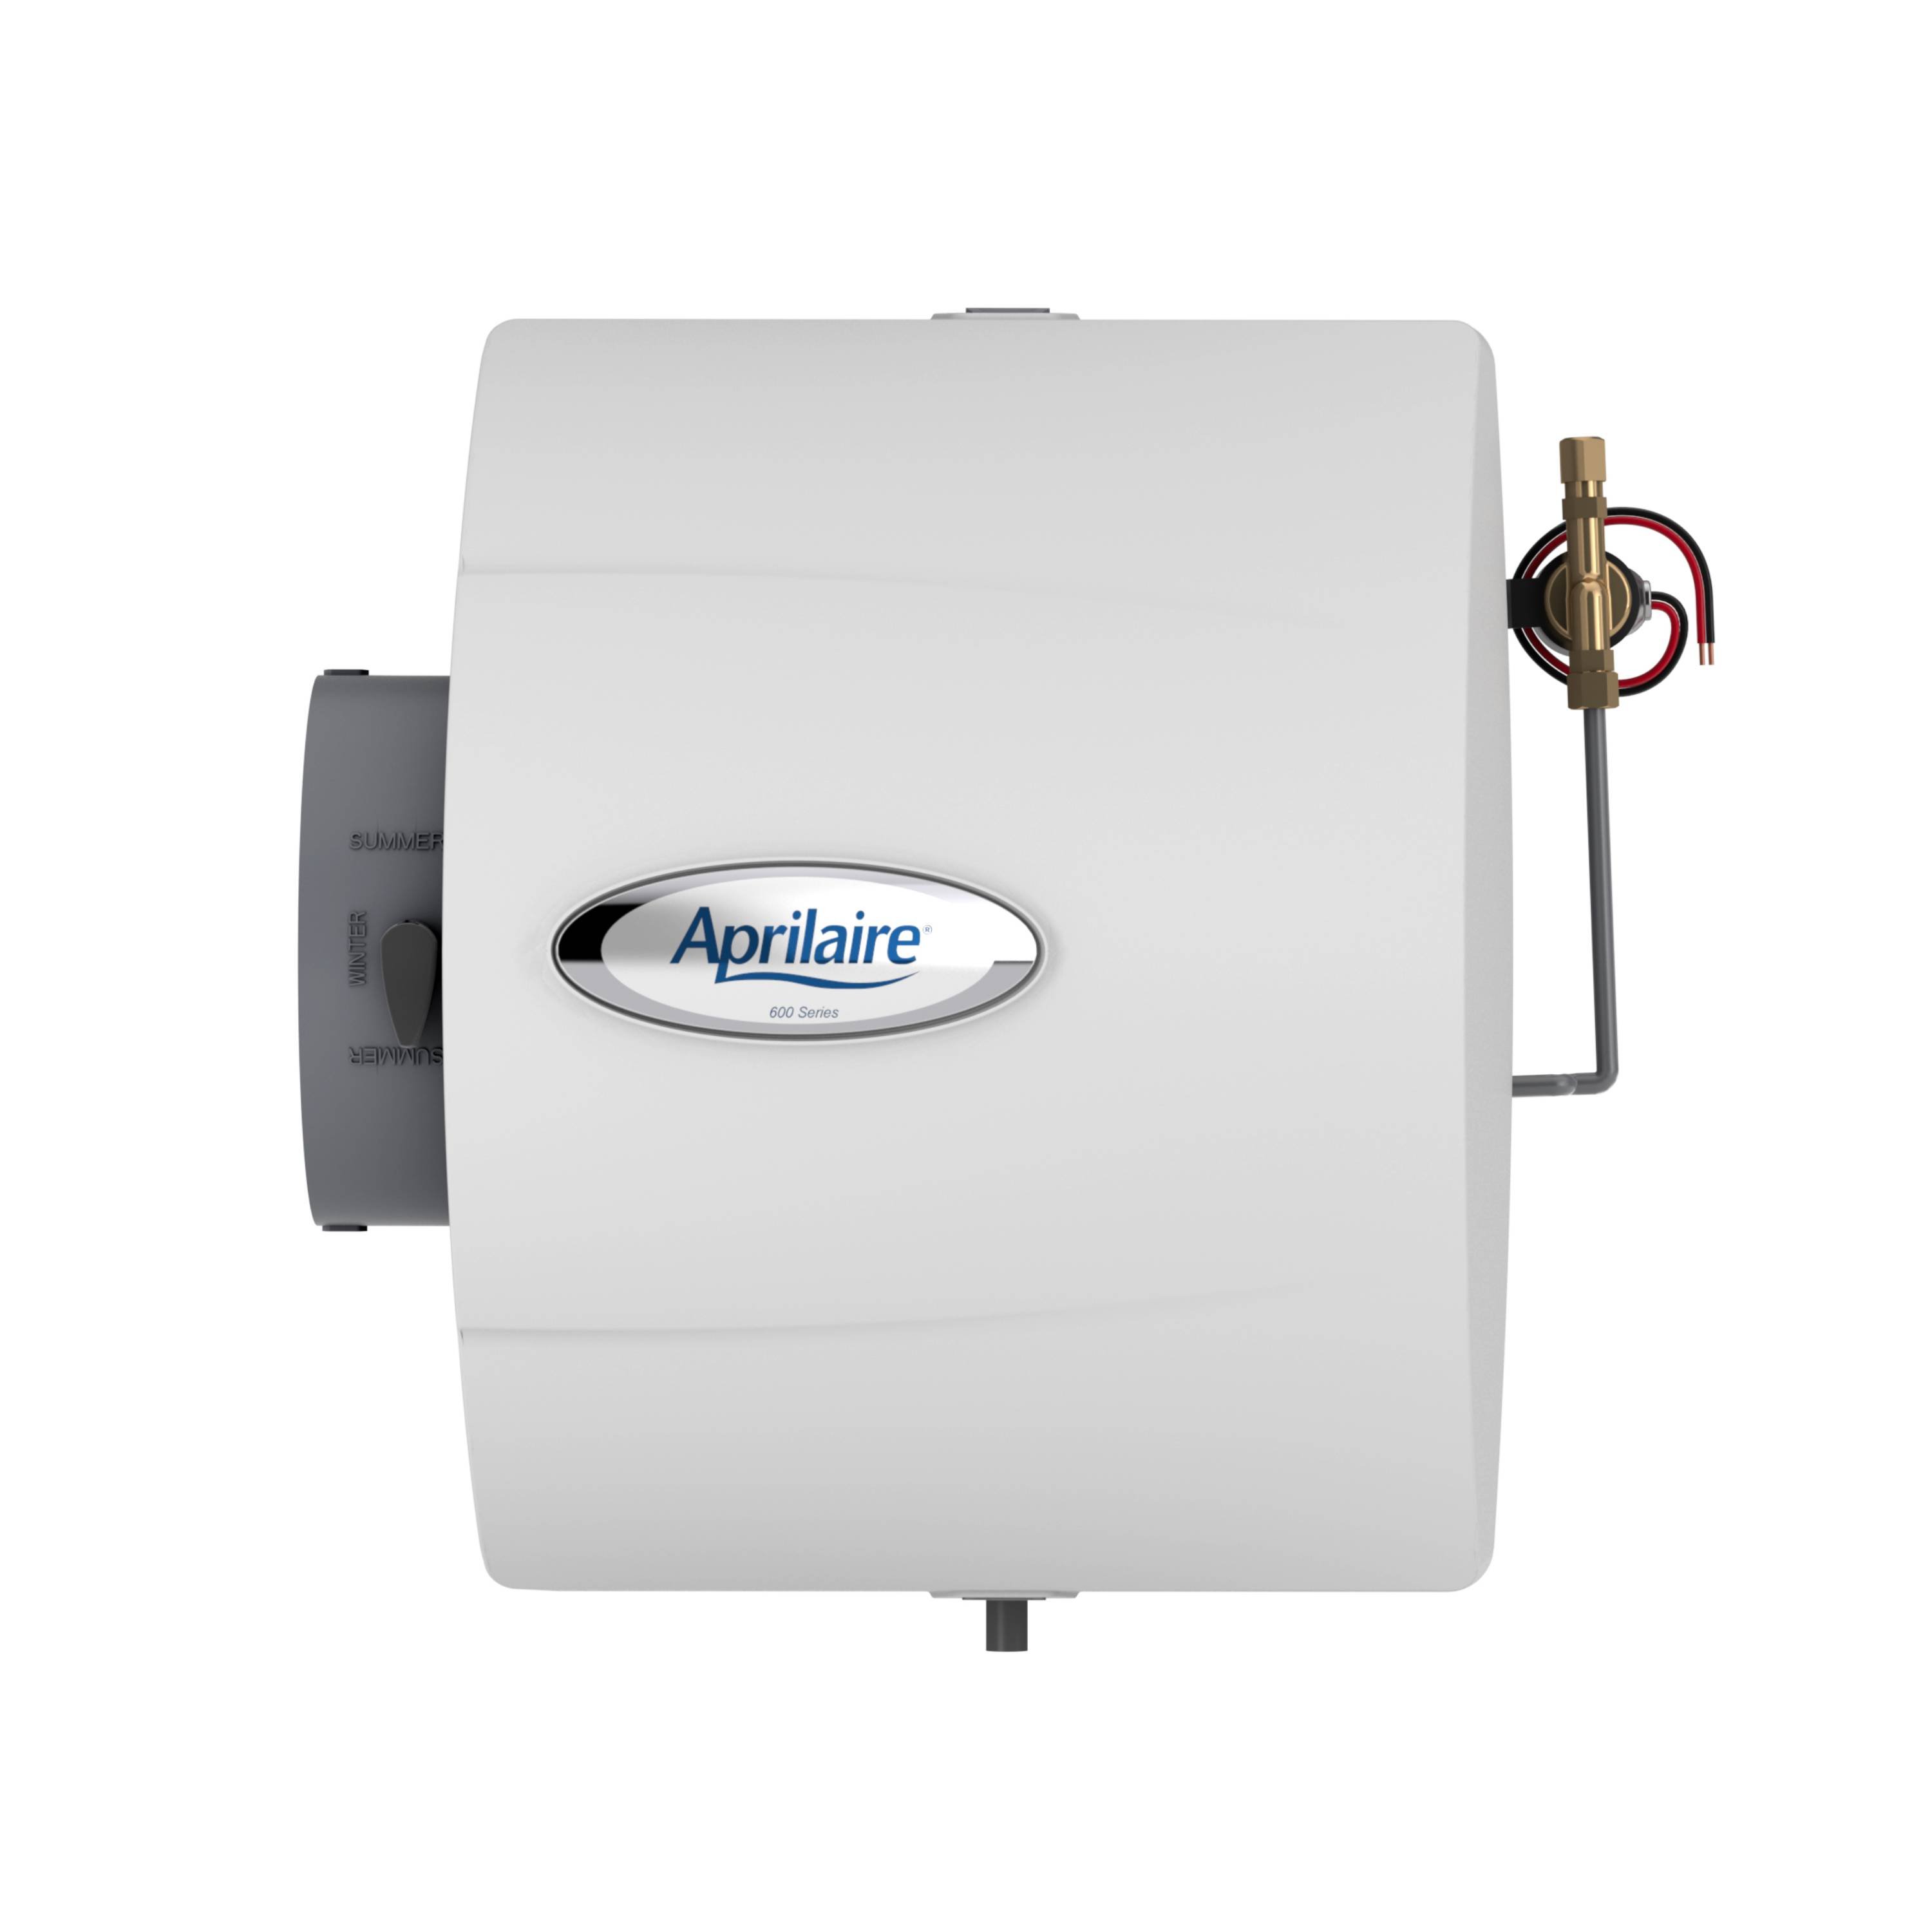 AprilAire 600M Whole House Humidifier with Manual Control